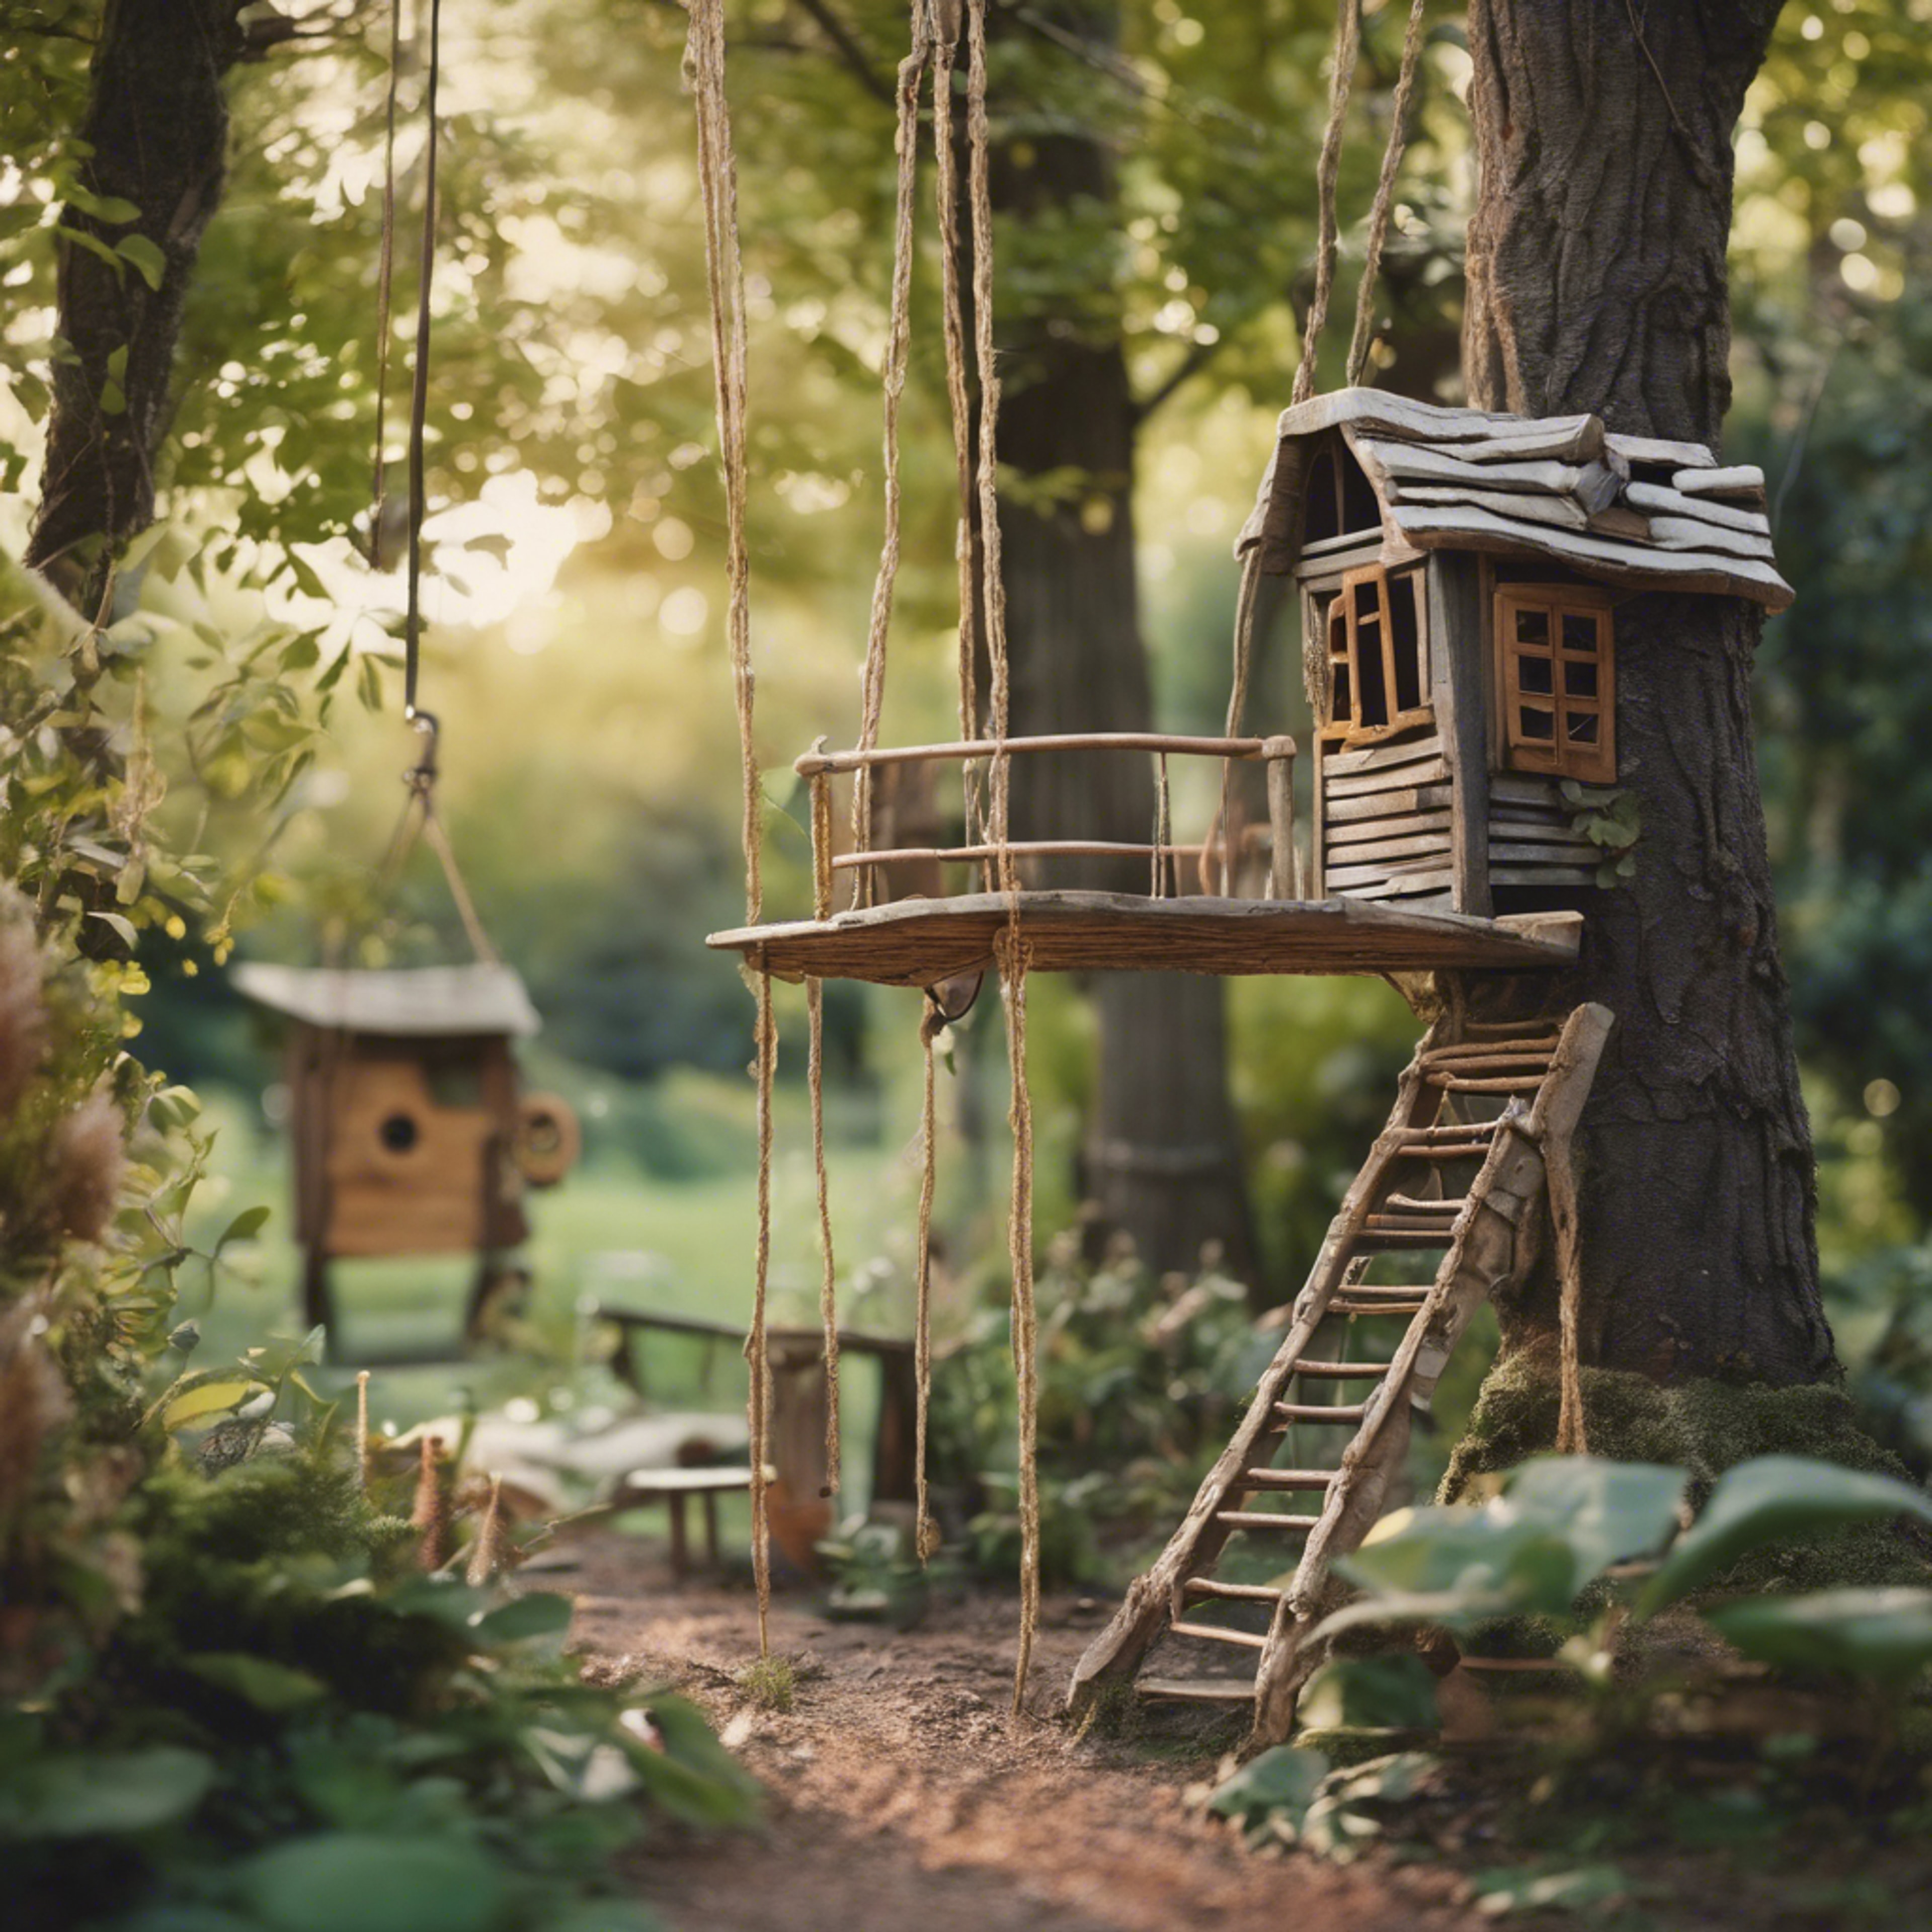 A nostalgic children’s garden filled with hidden treasures, tire swings, and treehouses built amidst towering trees. טפט[4077f42451f34ca69b37]